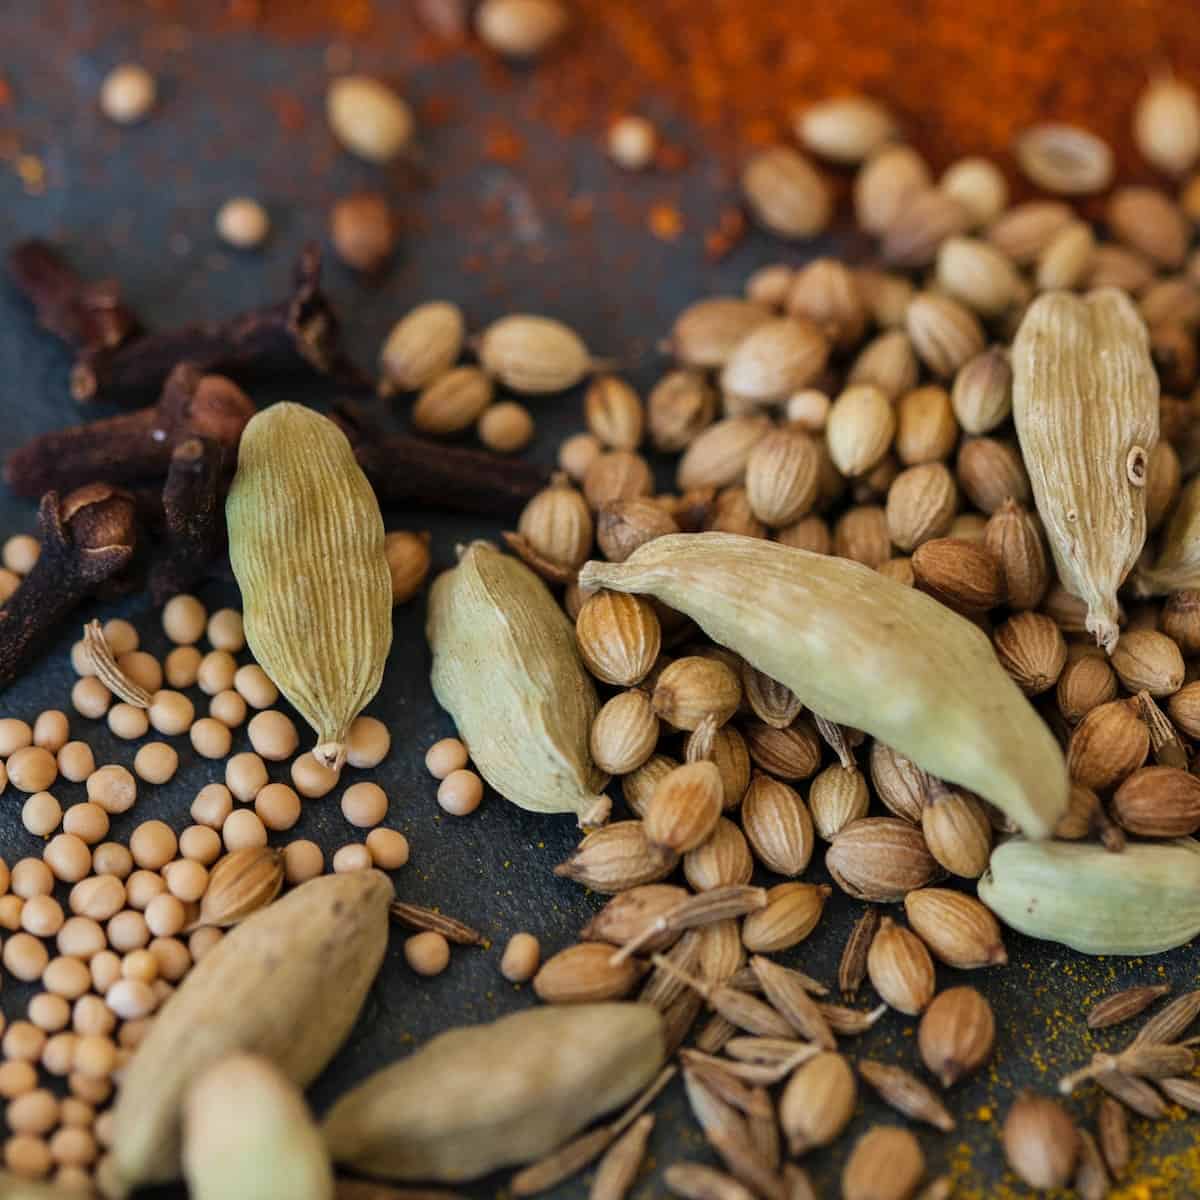 Cardamom pods and seeds freely laid on the table